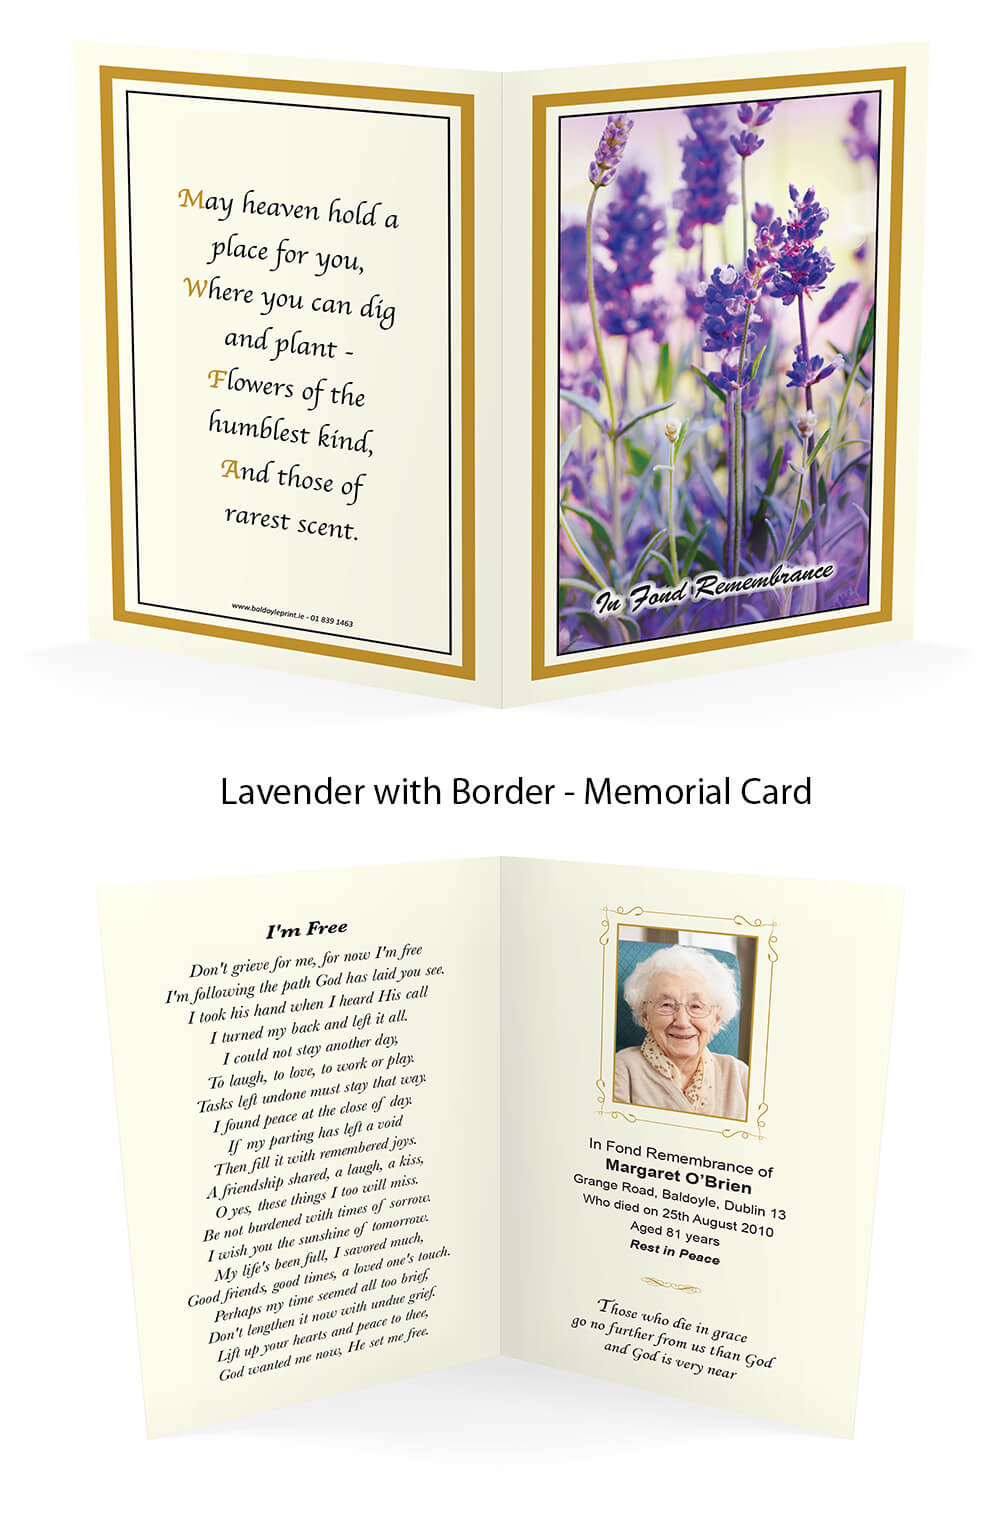 Lavender with Border